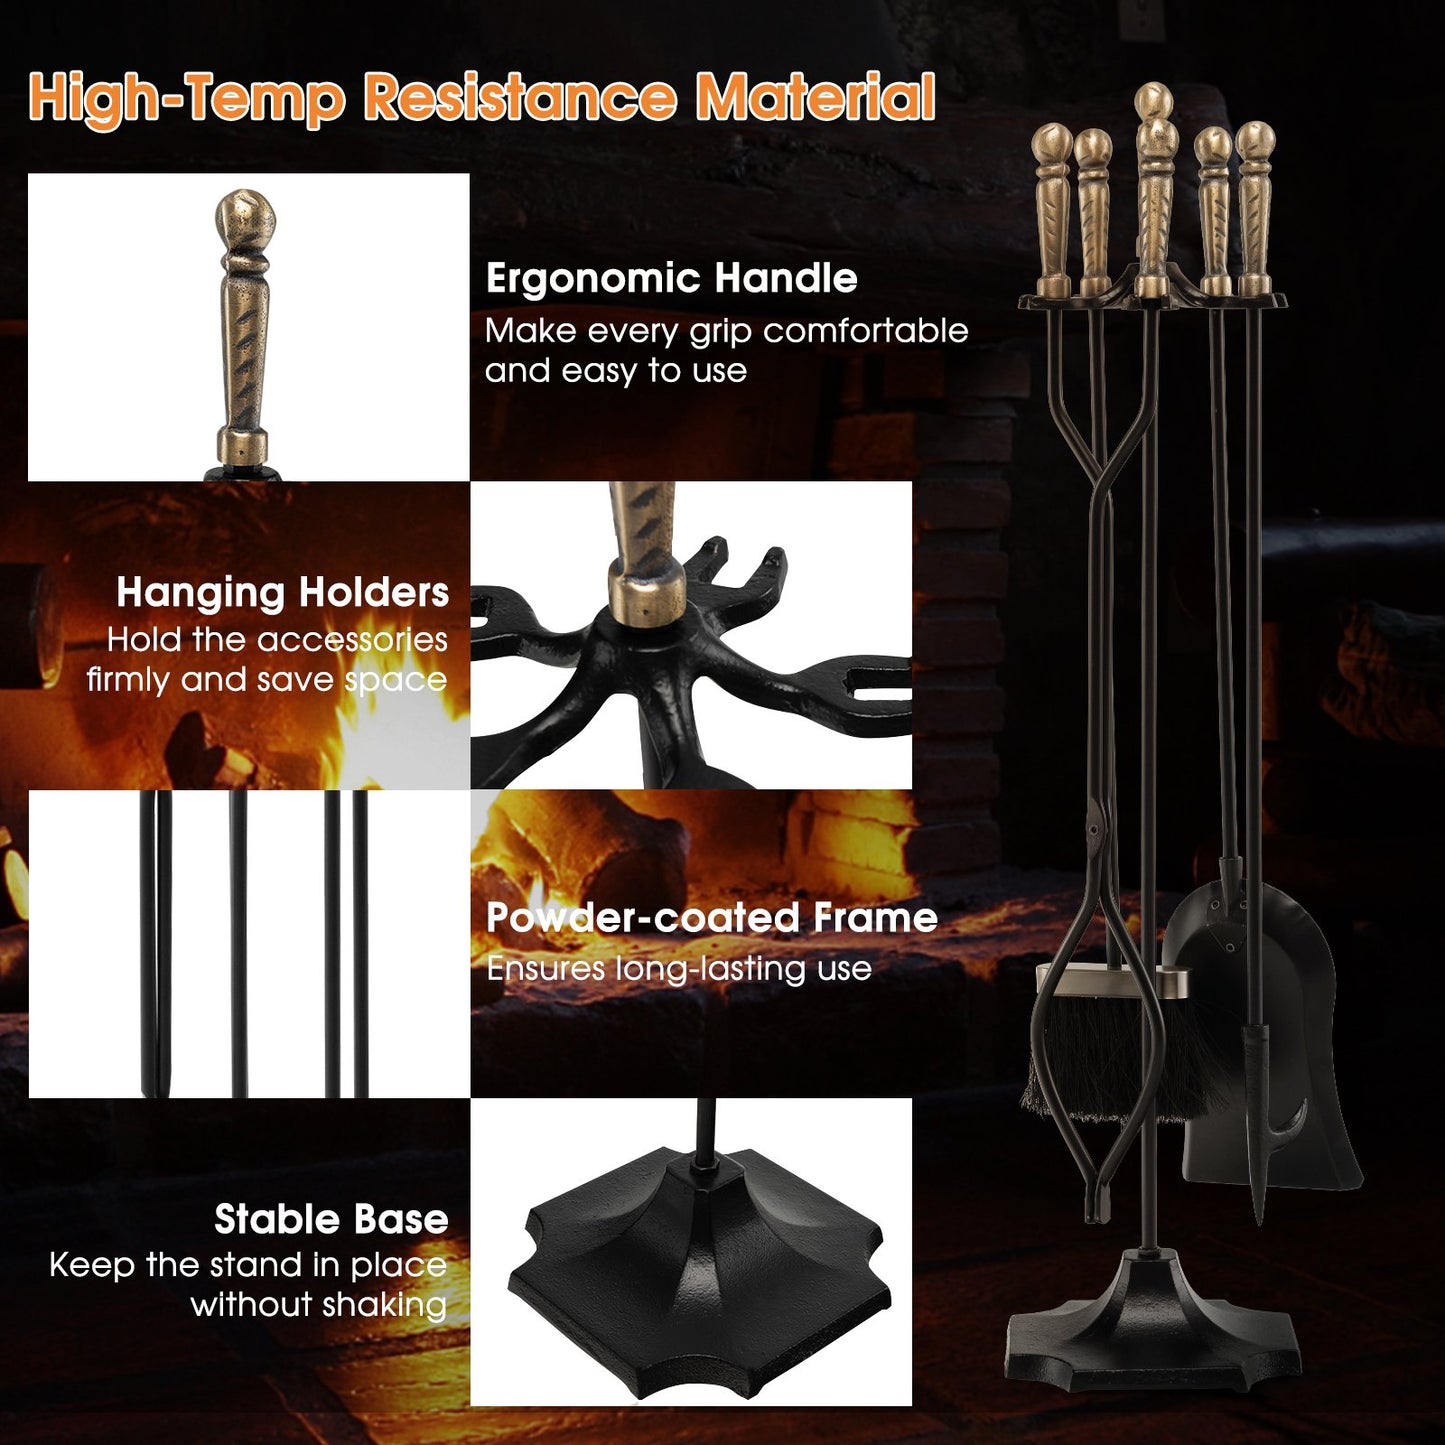 31 inch 5 Pieces Metal Fireplace Tool Set with Stand, Bronze